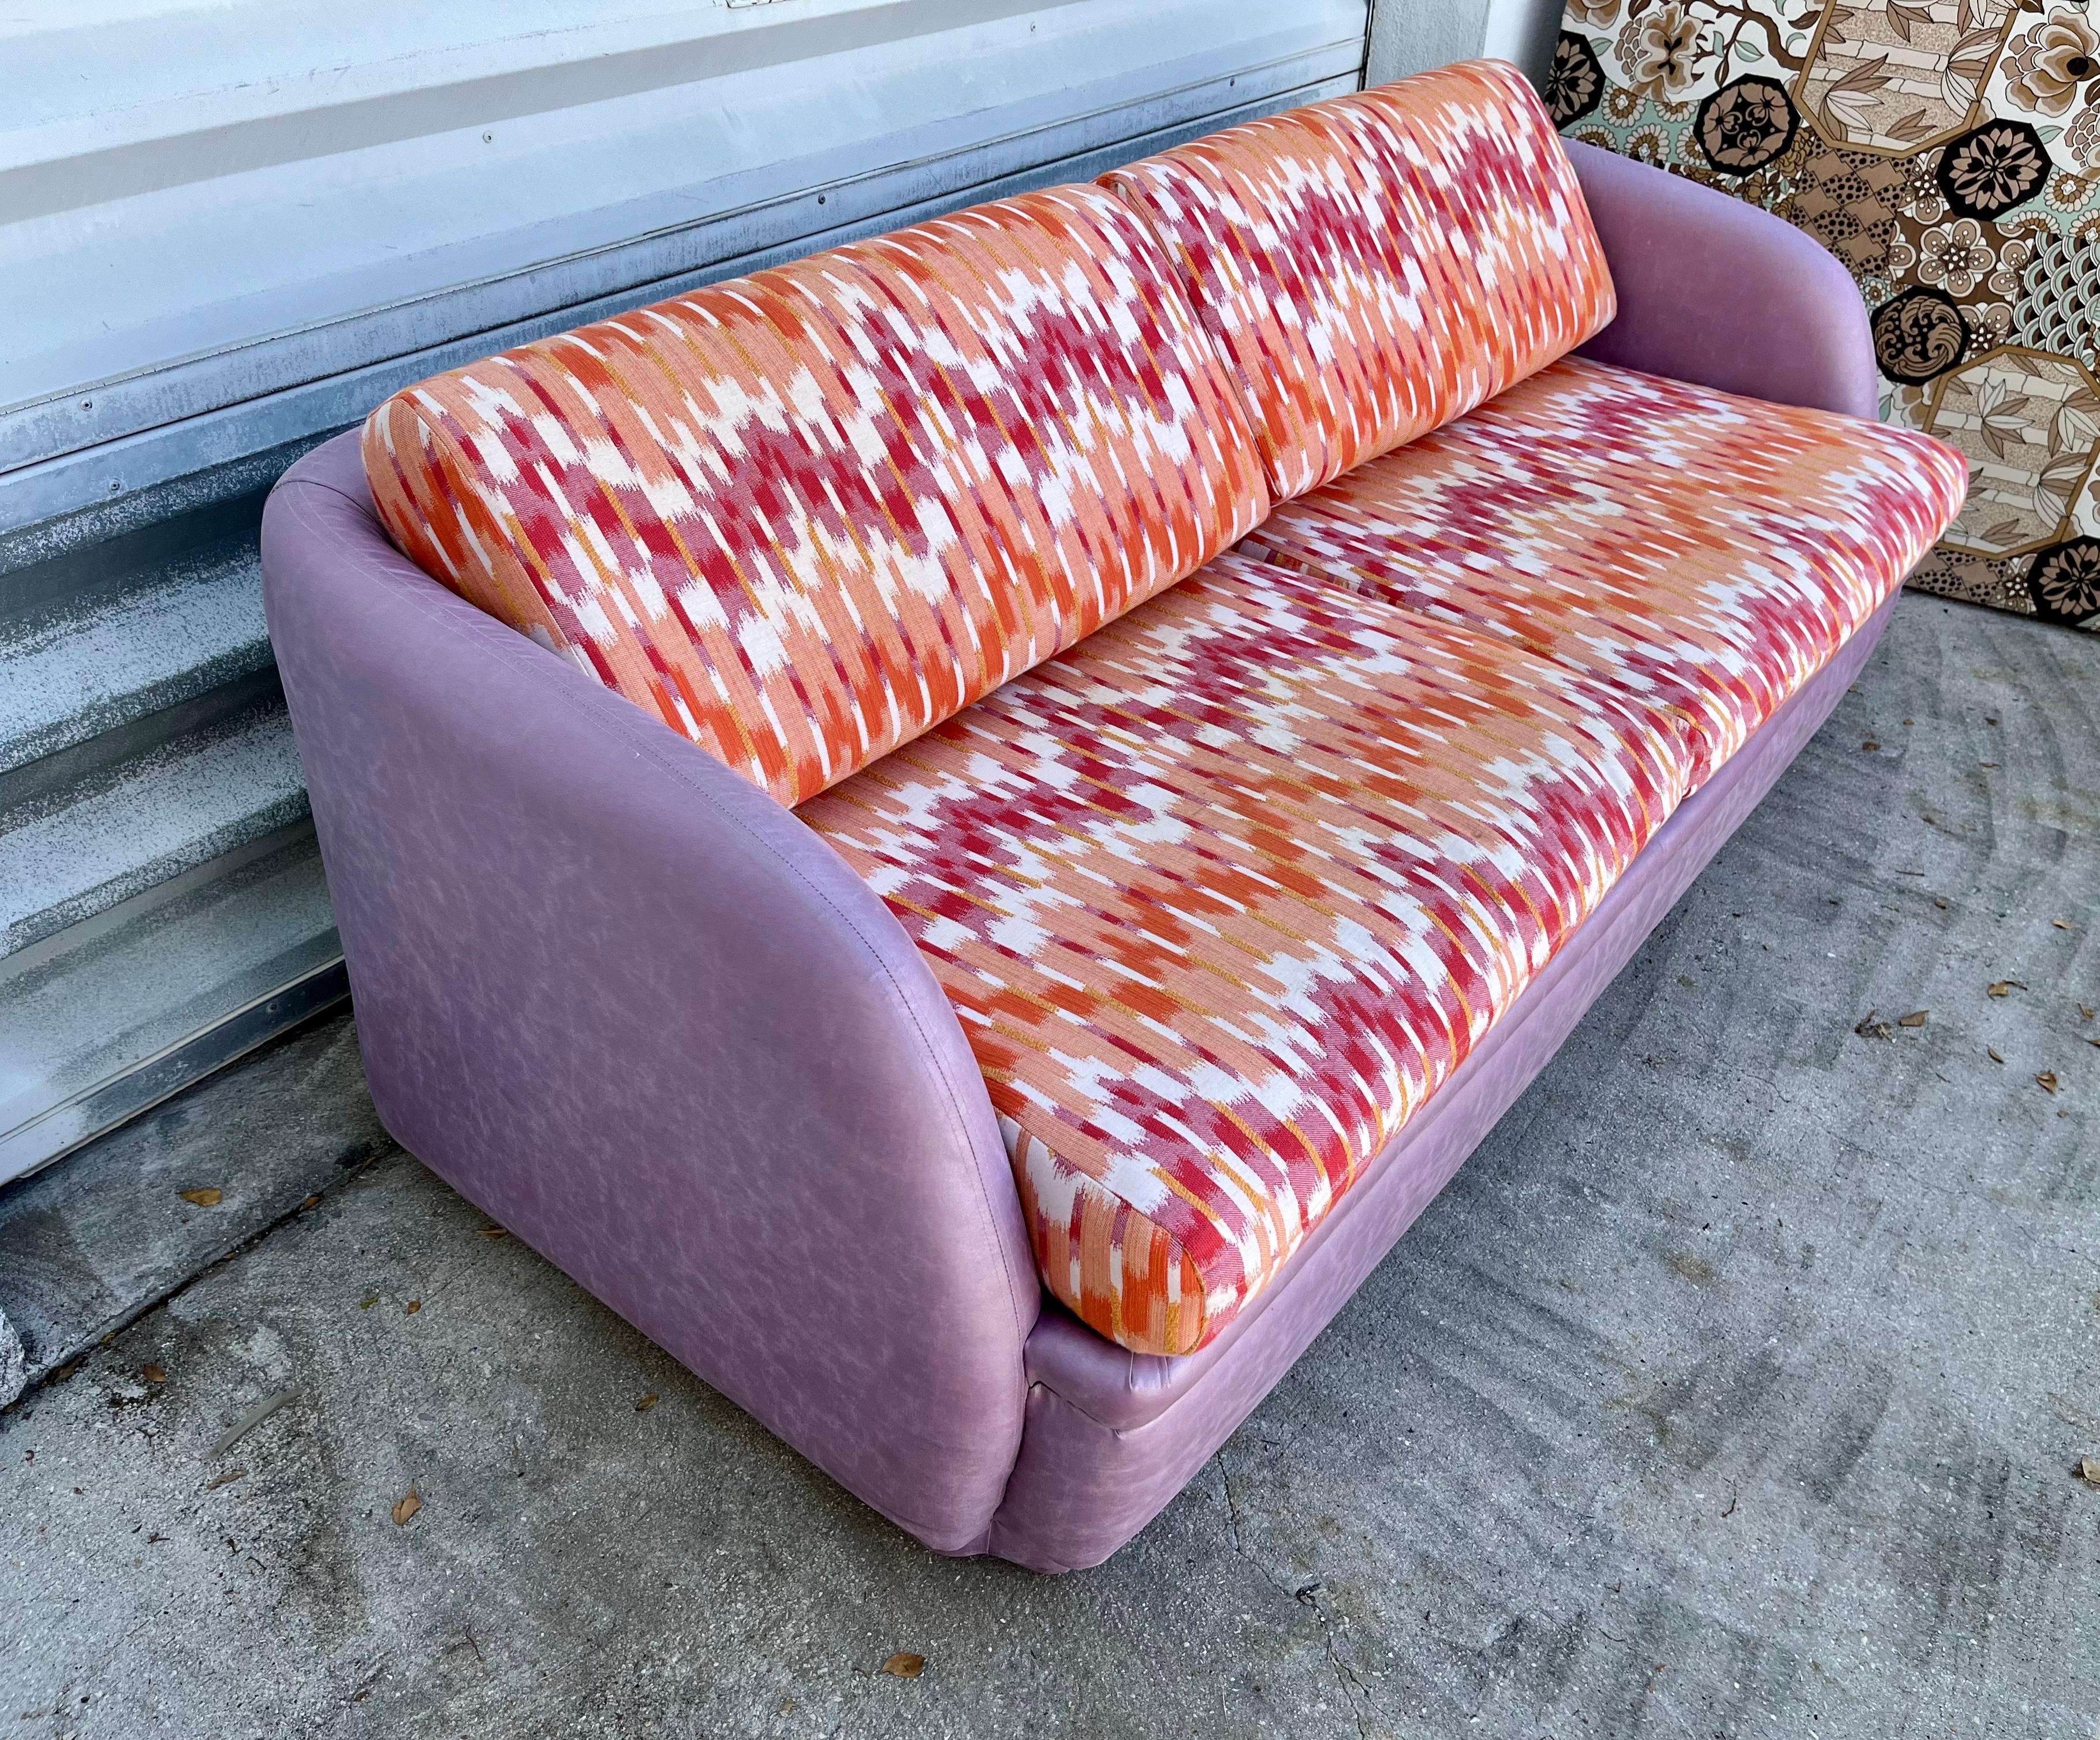 Vintage Postmodern Sleeper Sofa by Thayer Coggin Institutional. Circa 1980s
Features a pull out bed and light purple micro suede like upholstery with a contrasting Missoni Like upholstered removable cushions. 
In excellent near mint original